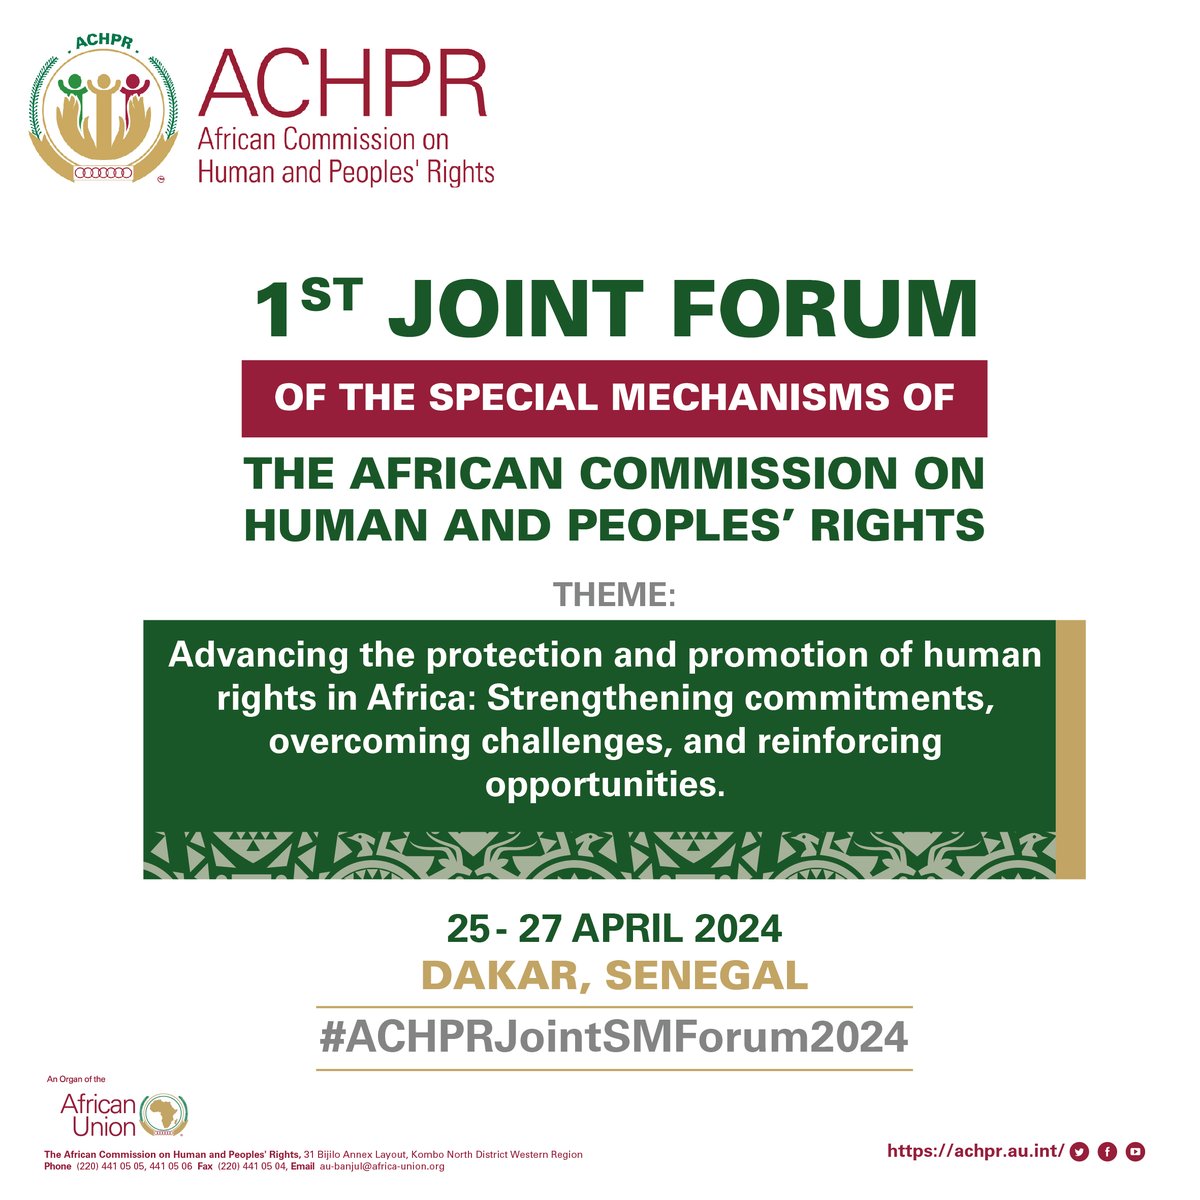 Get ready for the first-ever Joint Forum of Special Mechanisms by @achpr_cadhp in Dakar. 🗓️ 25 - 27 April, 2024 ⏲️ 9- 5PM (GMT time) The aim of this Forum is to deepen the @achpr_cadhp's intersectional approach to #HumanRights. #ACHPRJointSMForum2024